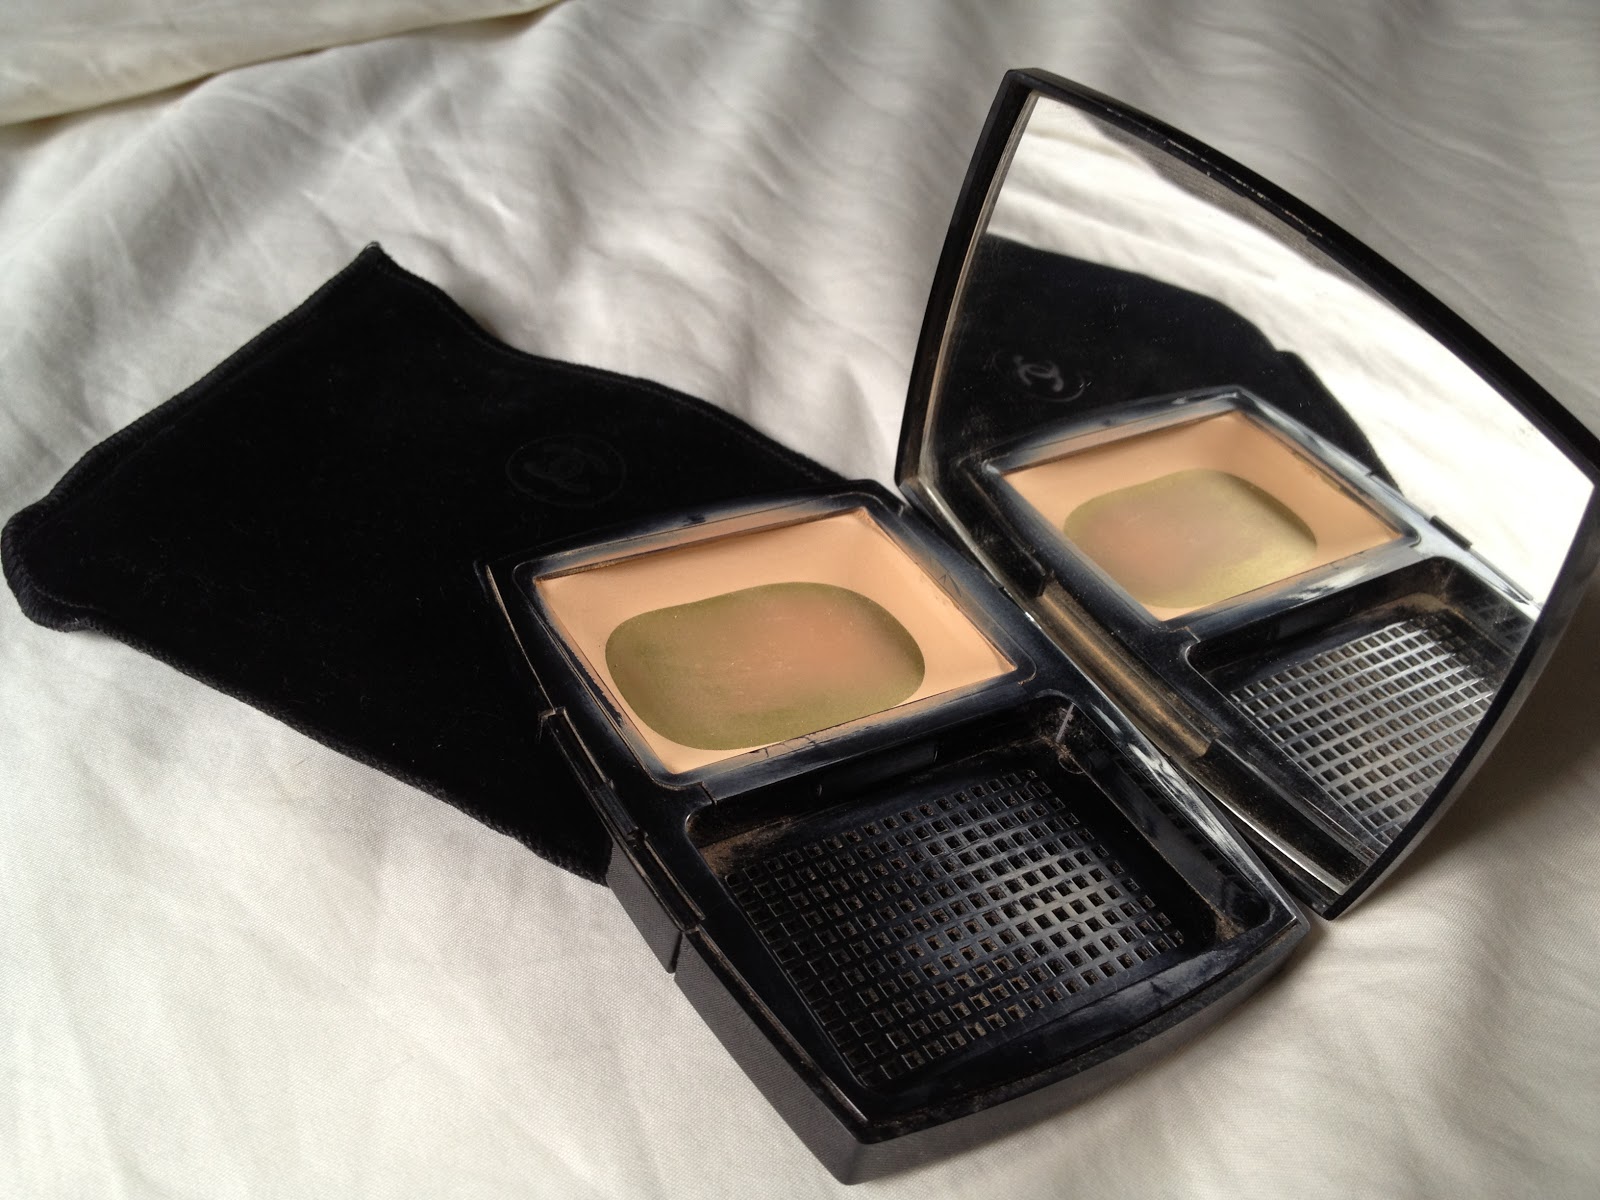 Chanel Double Perfection Lumiere Powder Makeup